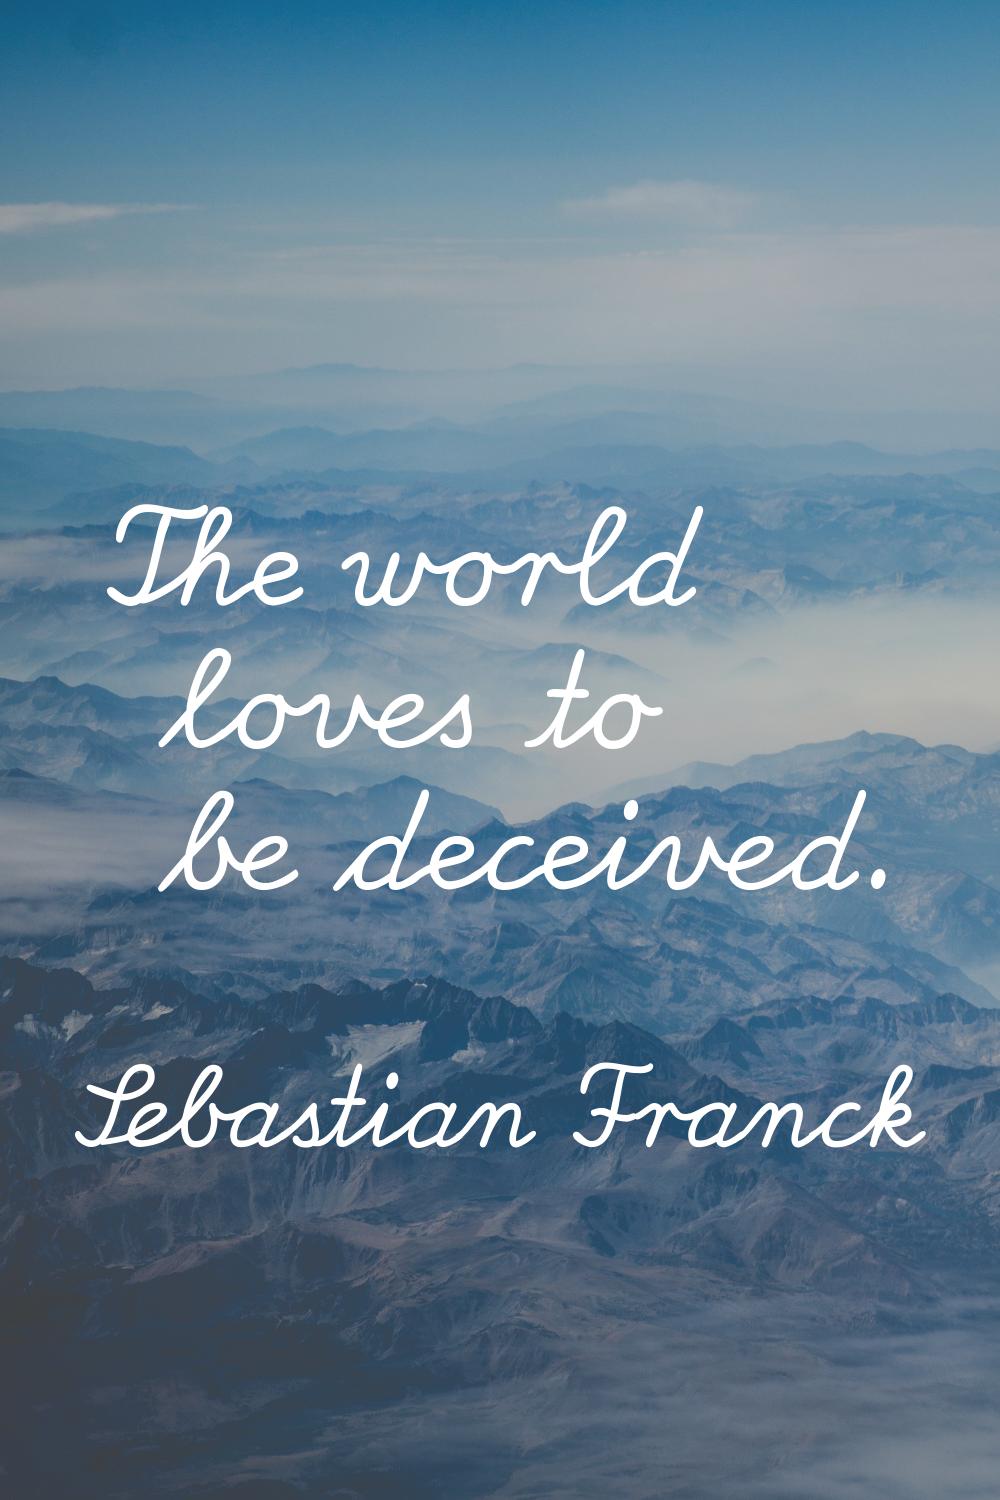 The world loves to be deceived.